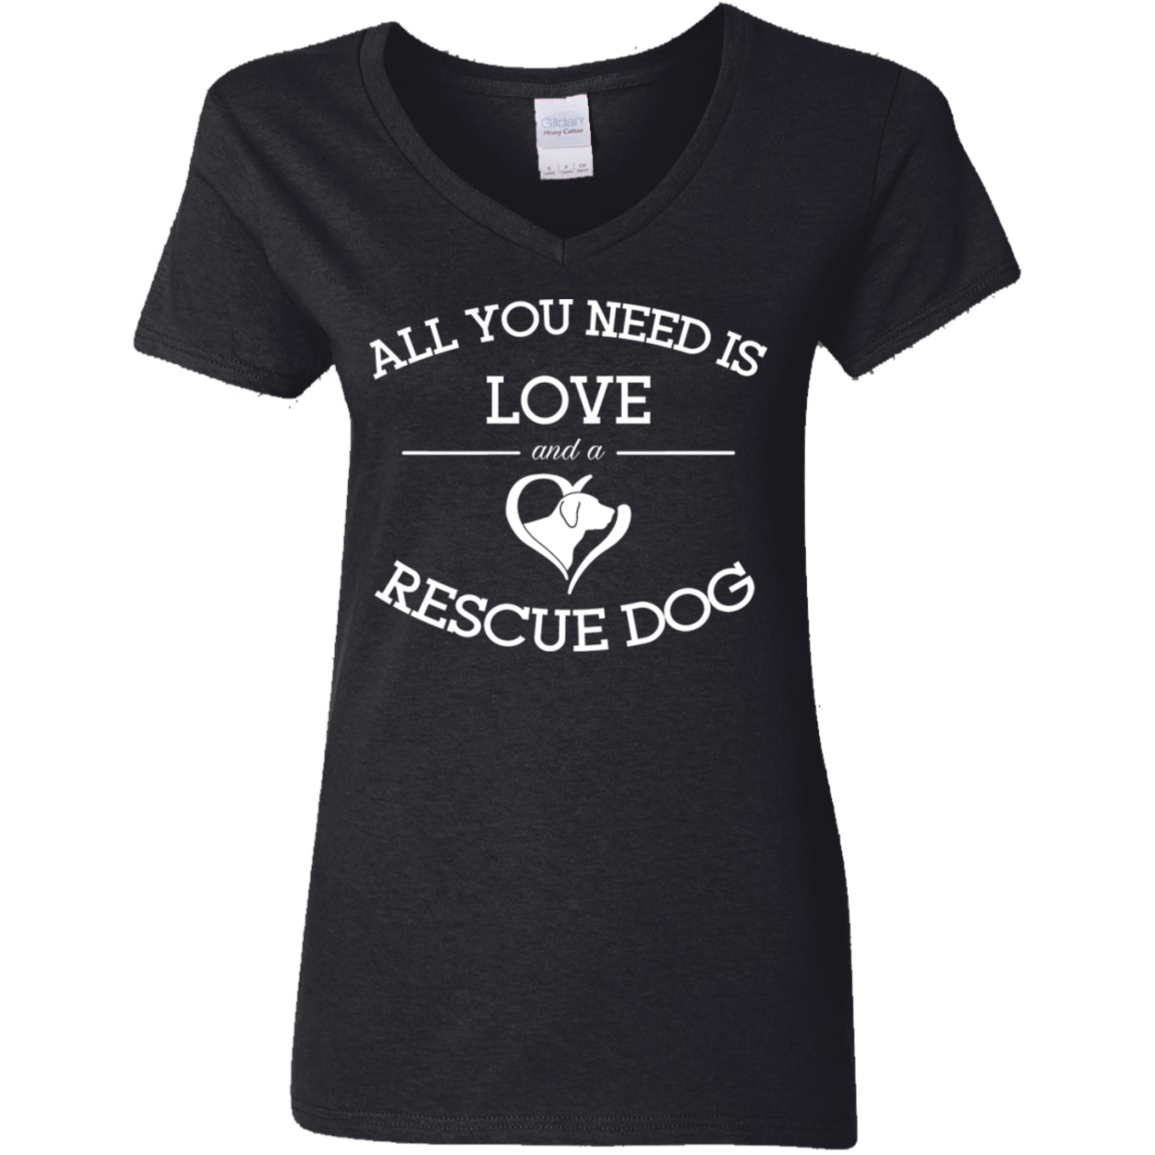 Love And A Rescue Dog - Ladies V Neck.